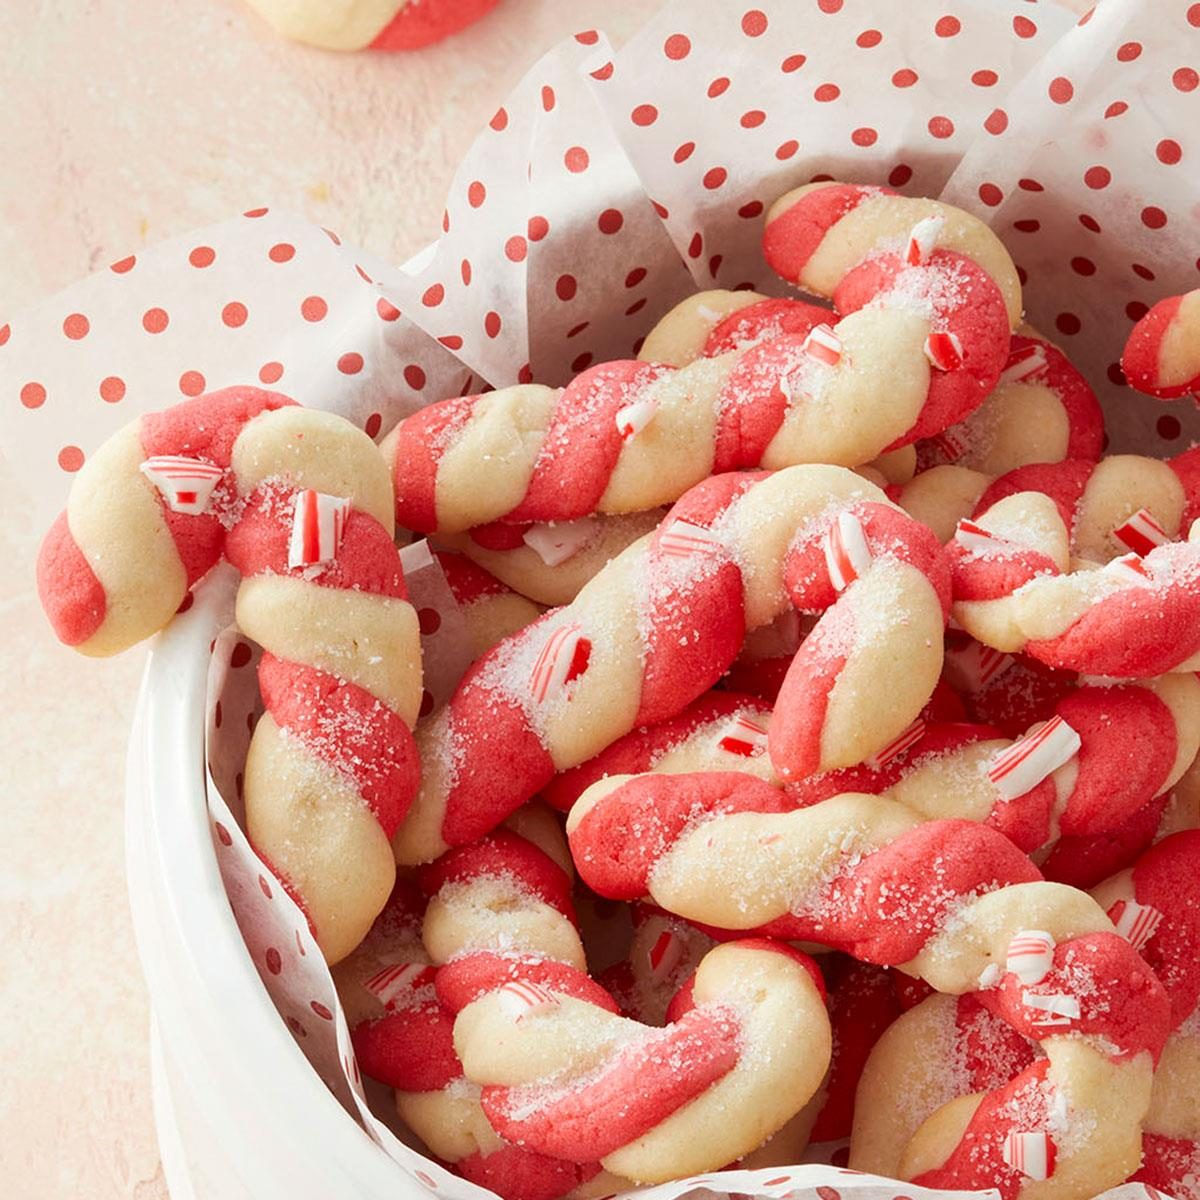 Christmas Candy Cane Cookies Recipe: How to Make It